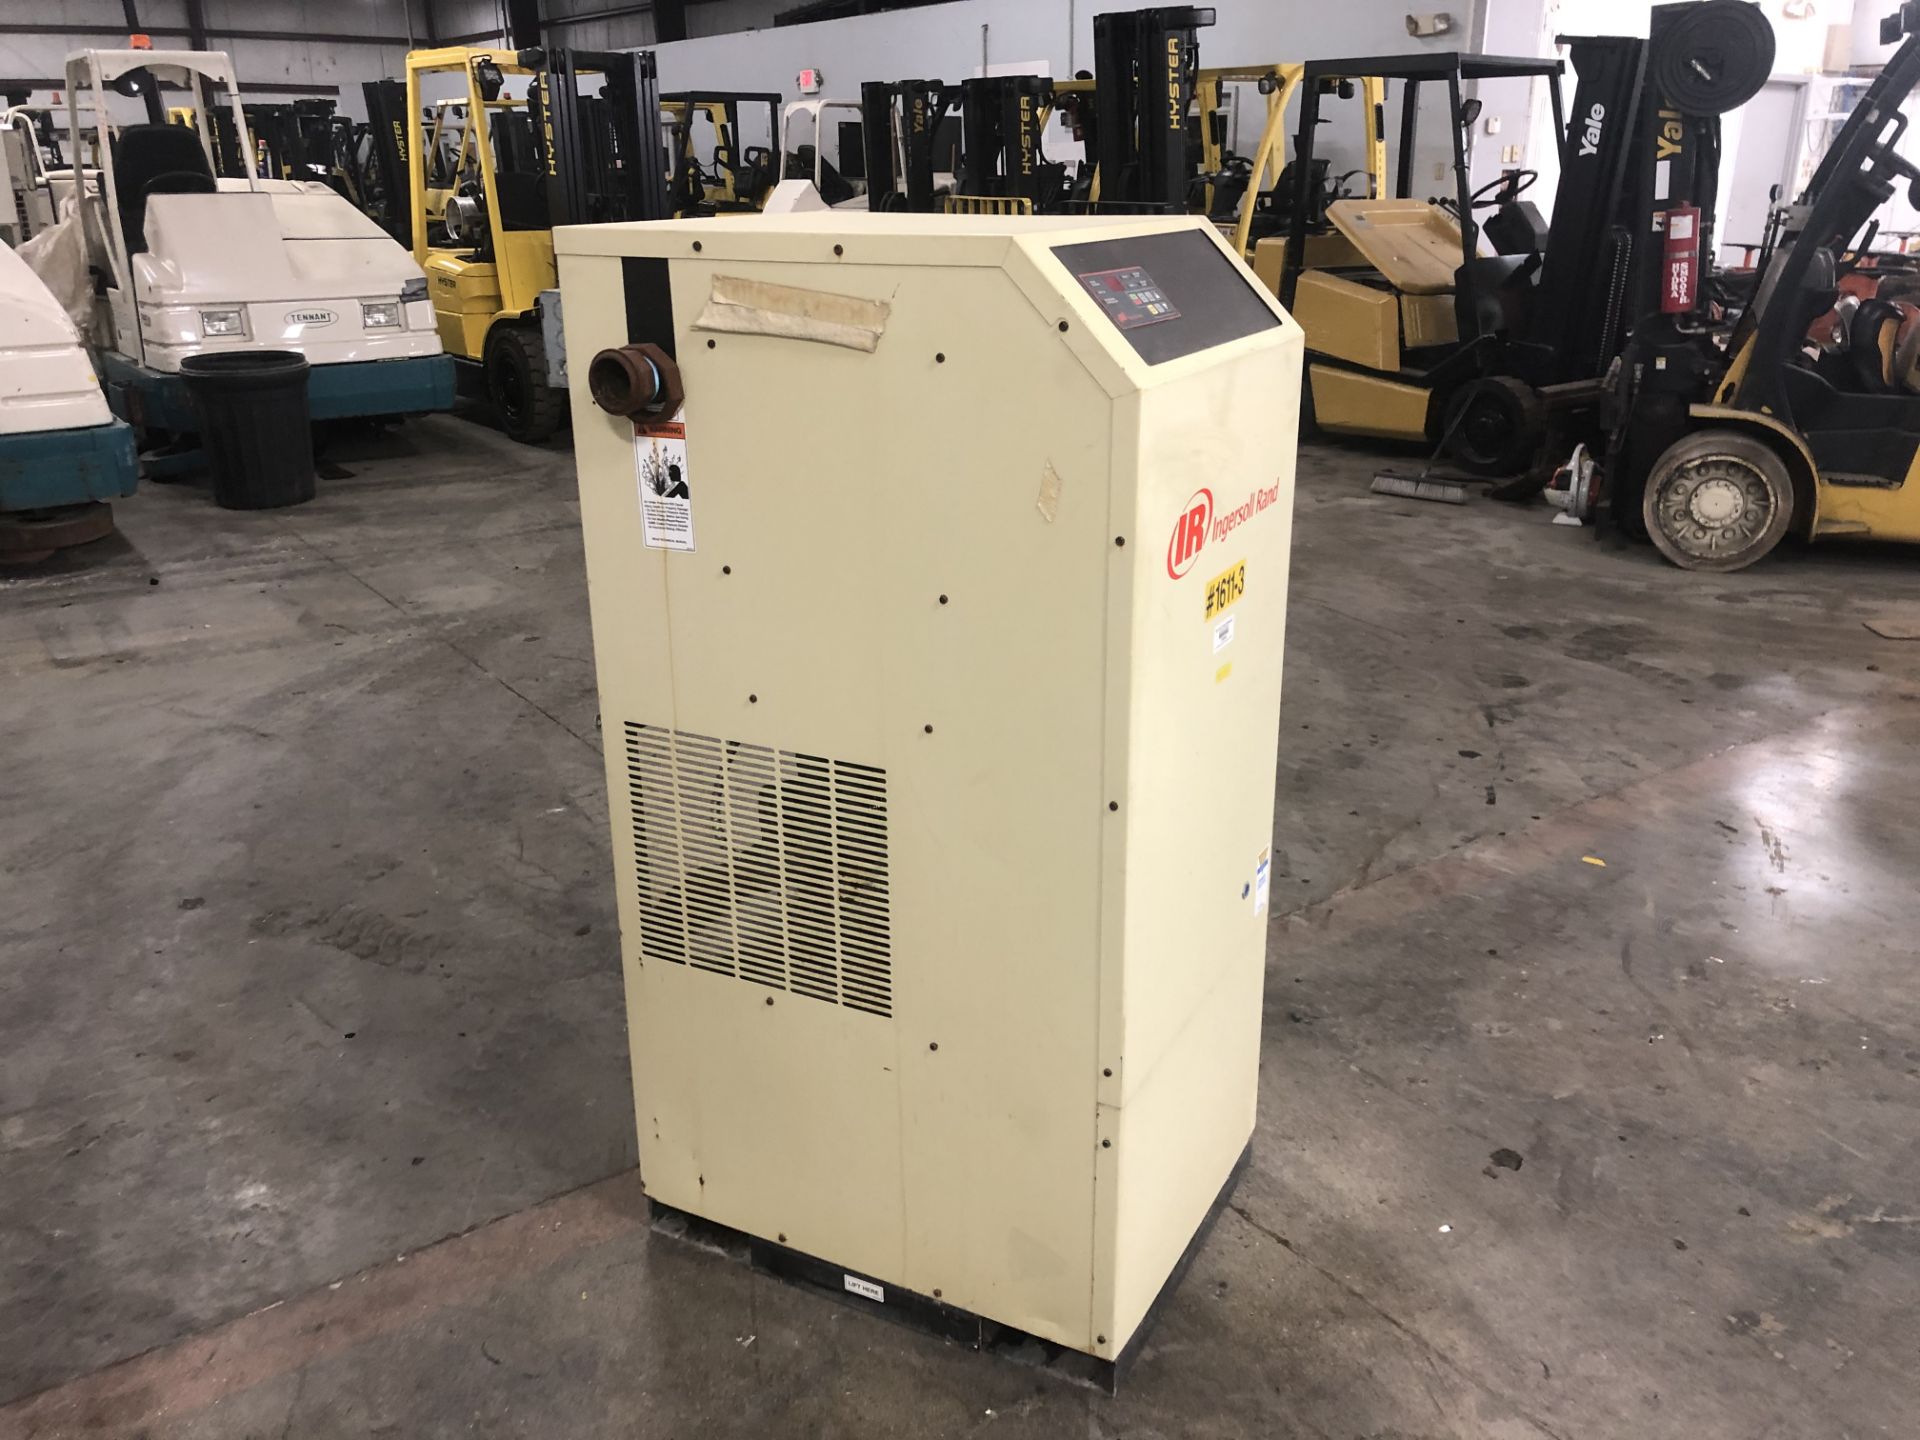 2010 Ingersoll Rand Air Dryer, Model: NVC300A400, Serial Number: 329160, 230 PSIG￼